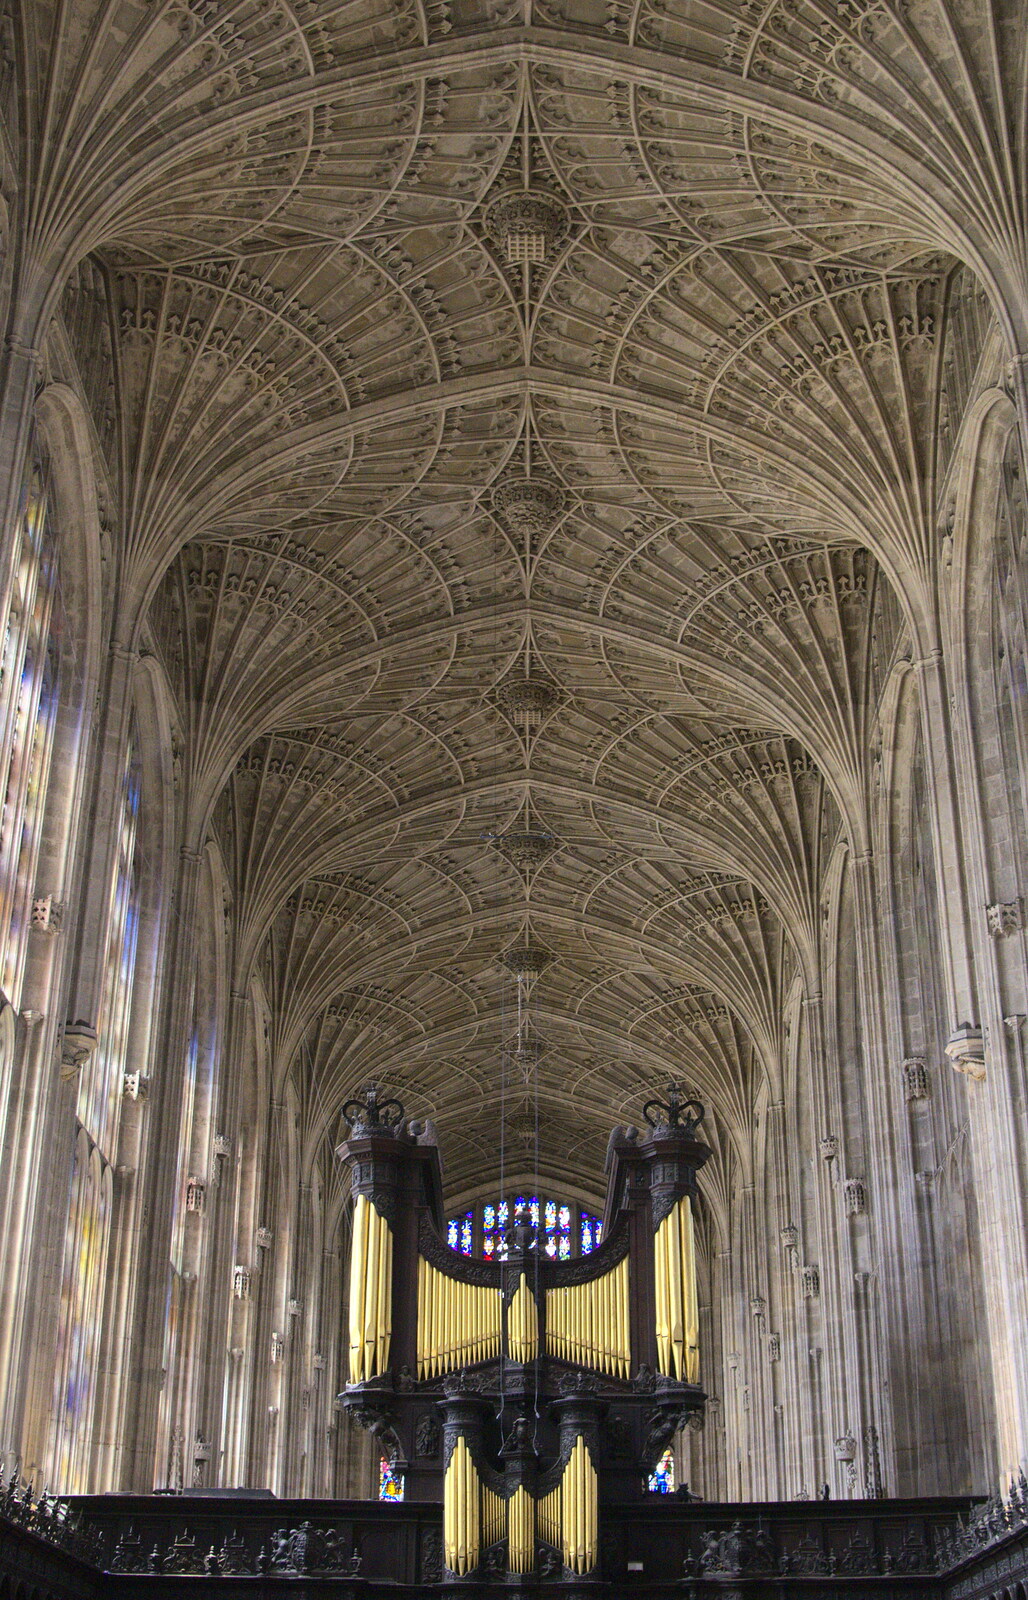 The highly-detailed ceiling and the organ from Punting With Grandad, Cambridge, Cambridgeshire - 6th June 2015